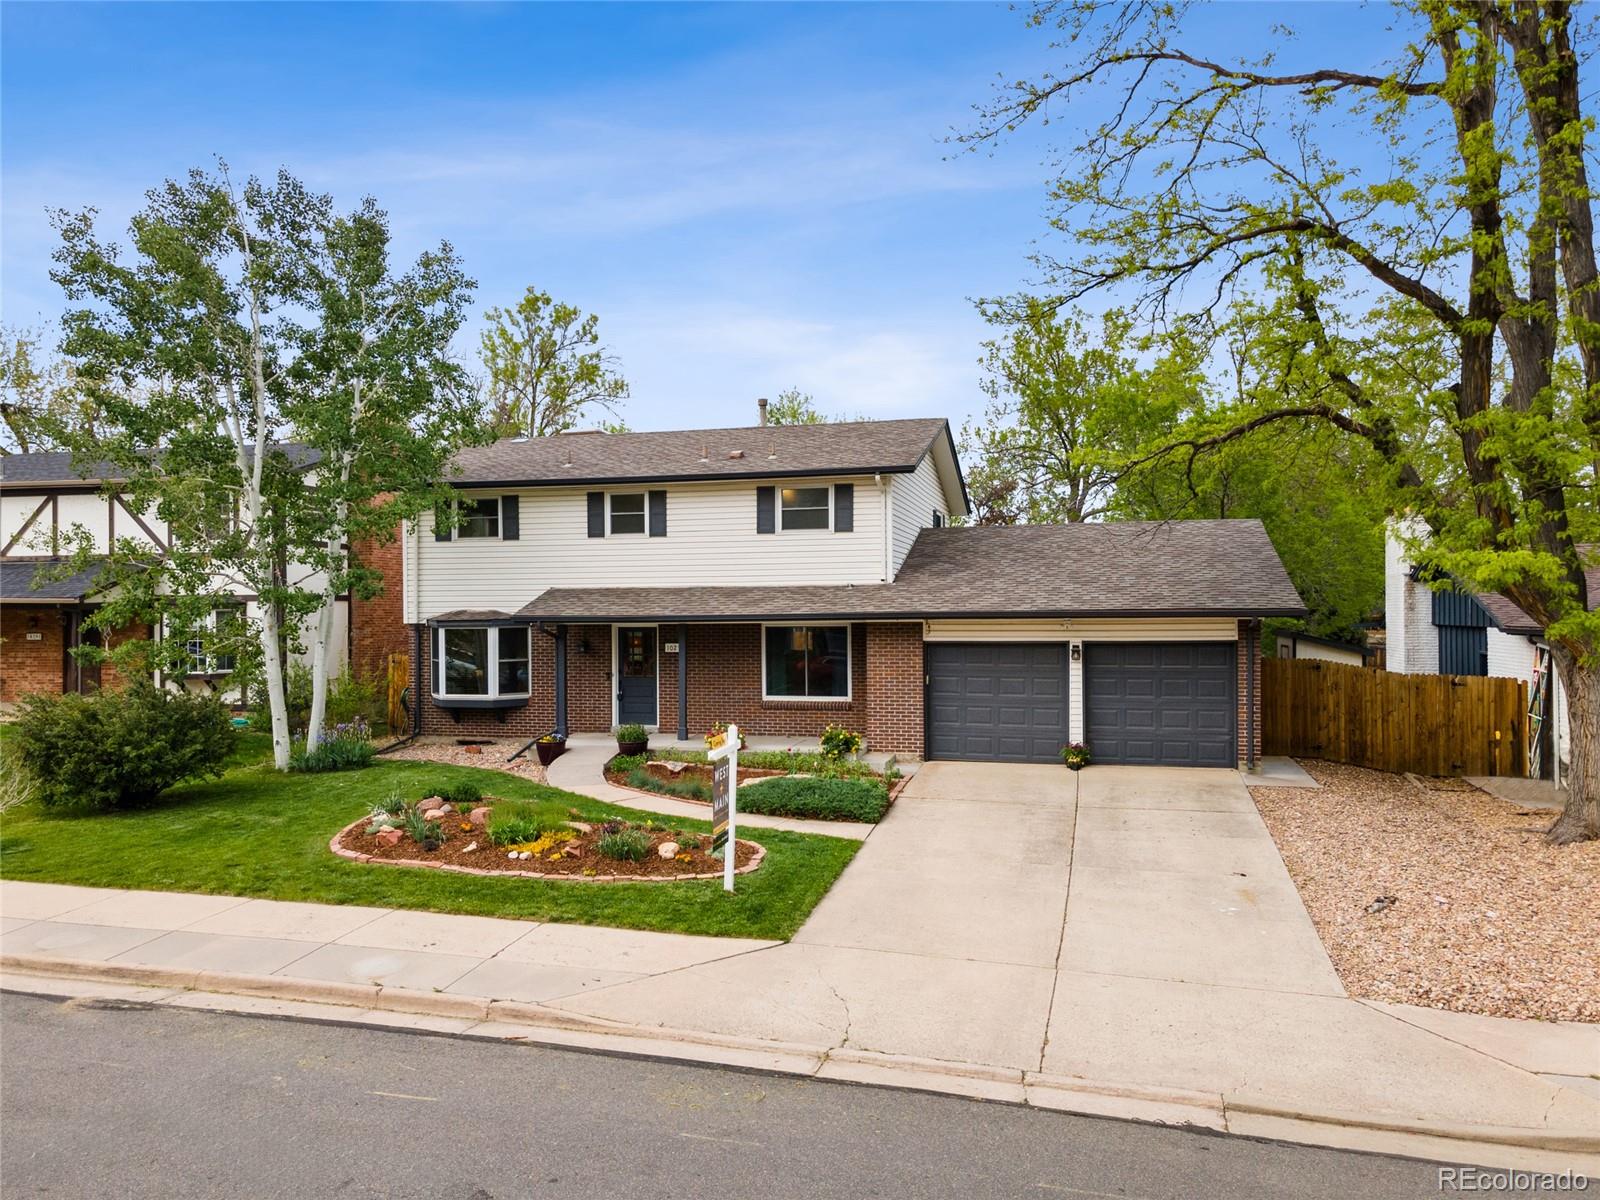 CMA Image for 10529 w exposition drive,Lakewood, Colorado